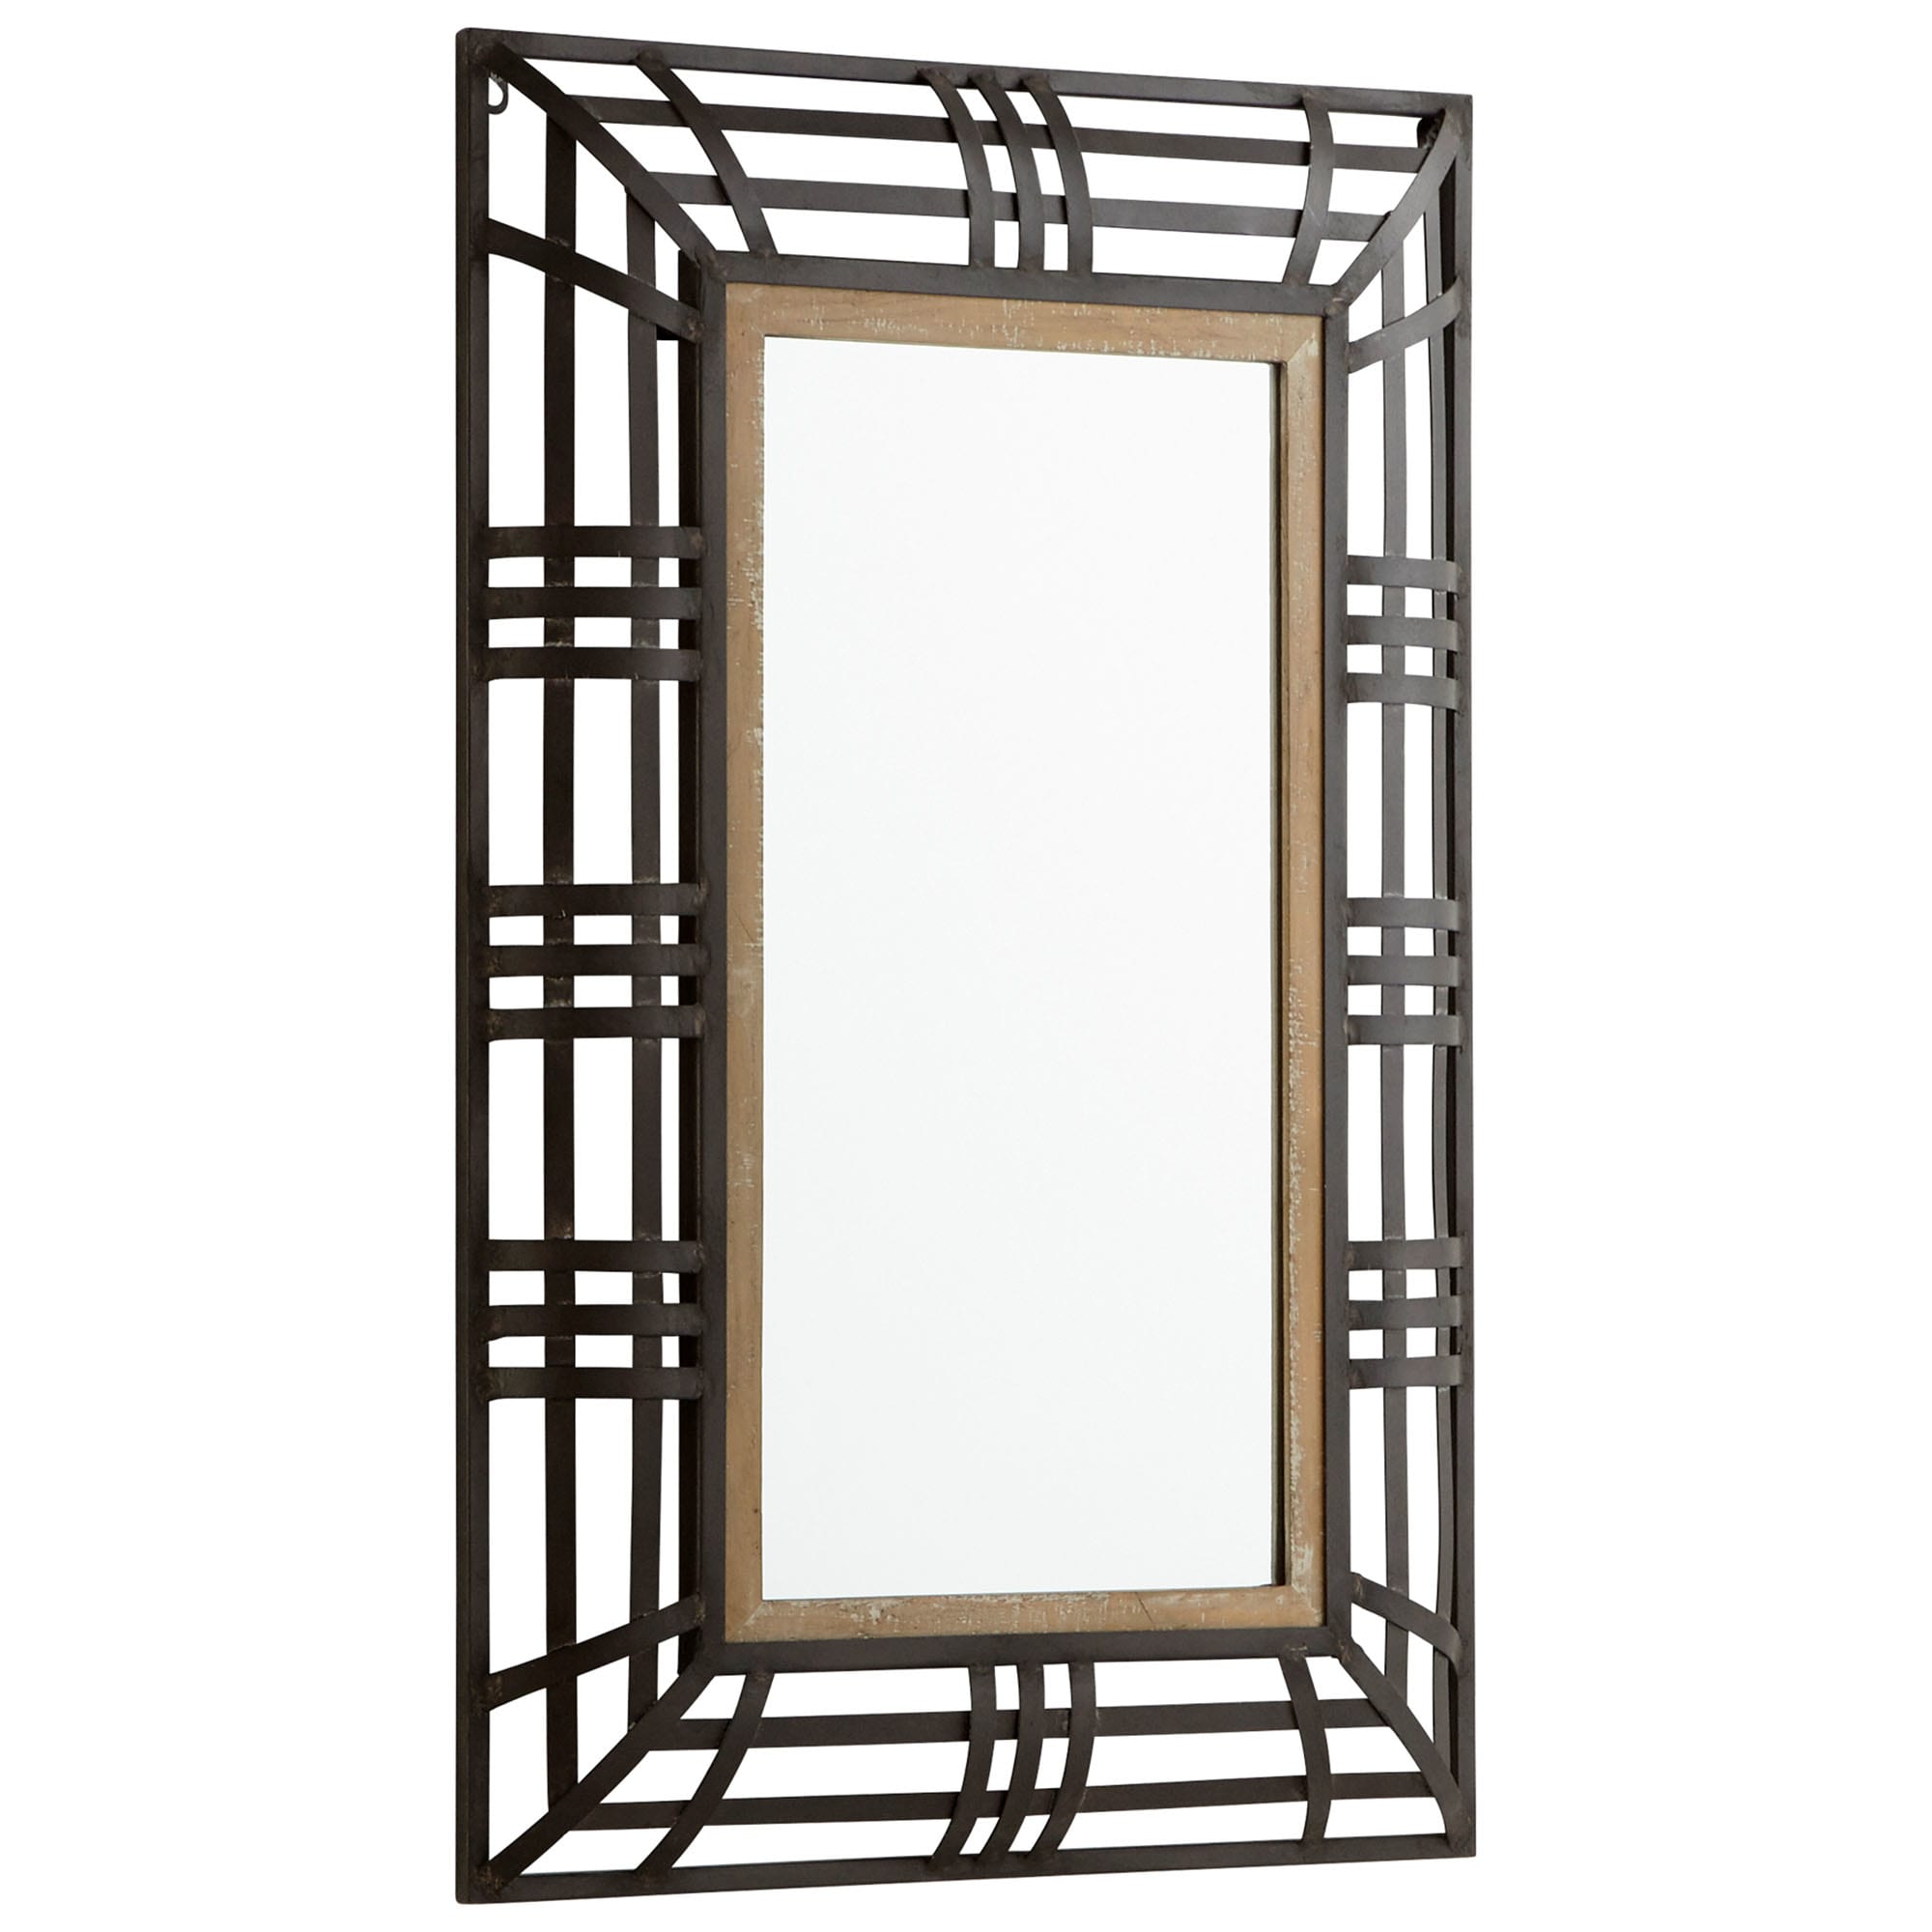 Cyan Design 09045 Bronze Banded About, 36 X 40 White Framed Mirror